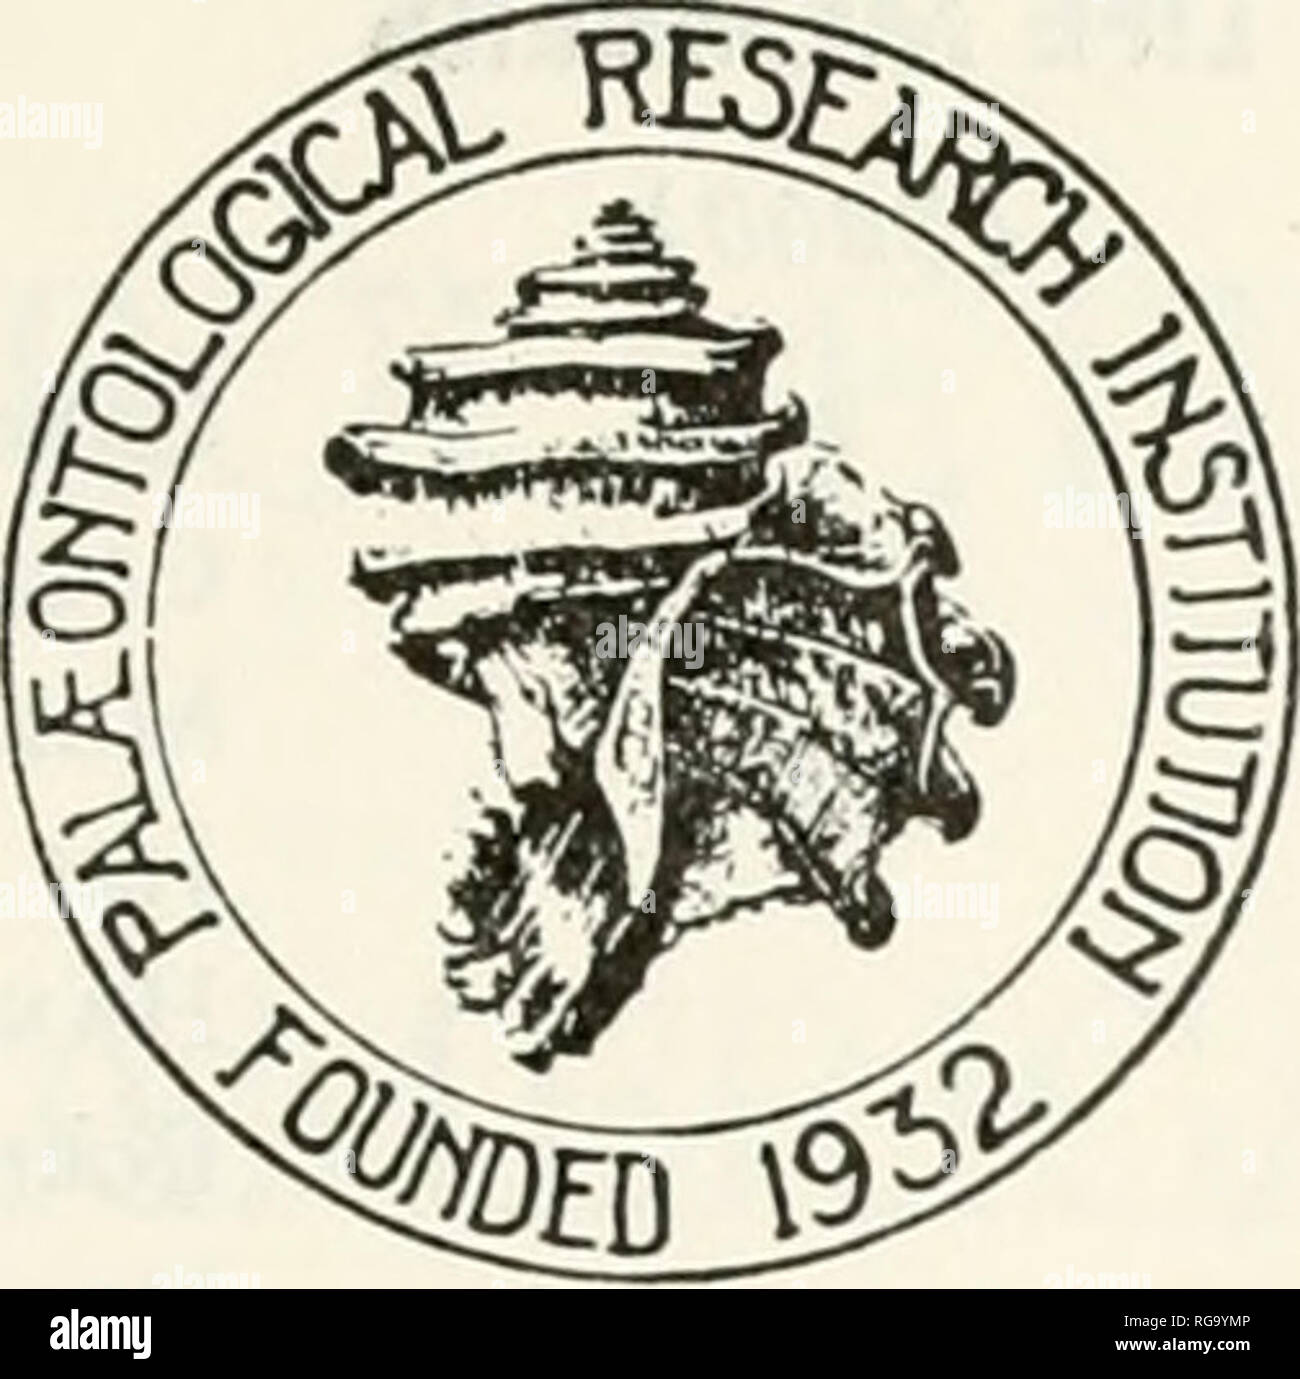 . Bulletins of American paleontology. . The Paleontological Research Institution acknowledges with special thanks the contributions of the following individuals and institutions PATRONS ($1000 or more at the discretion of the contributor) James A. Allen (1967) Armand L. Adams (1976) Atlantic Richfield Company (1978) Miss Ethel Z. Bailey (1970) Christina L. Balk (1970) Mr. k Mrs. Kenneth E. Caster (1967 Chevron Oil Company (1978) Exxon Company (1977 to date) Lois S. Fogelsanger (1966) Gulf Oil Corporation (1978) Merrill W. Haas (1975) Miss Rebecca S. Harris (1967) American Oil Company (1976) Mr Stock Photo